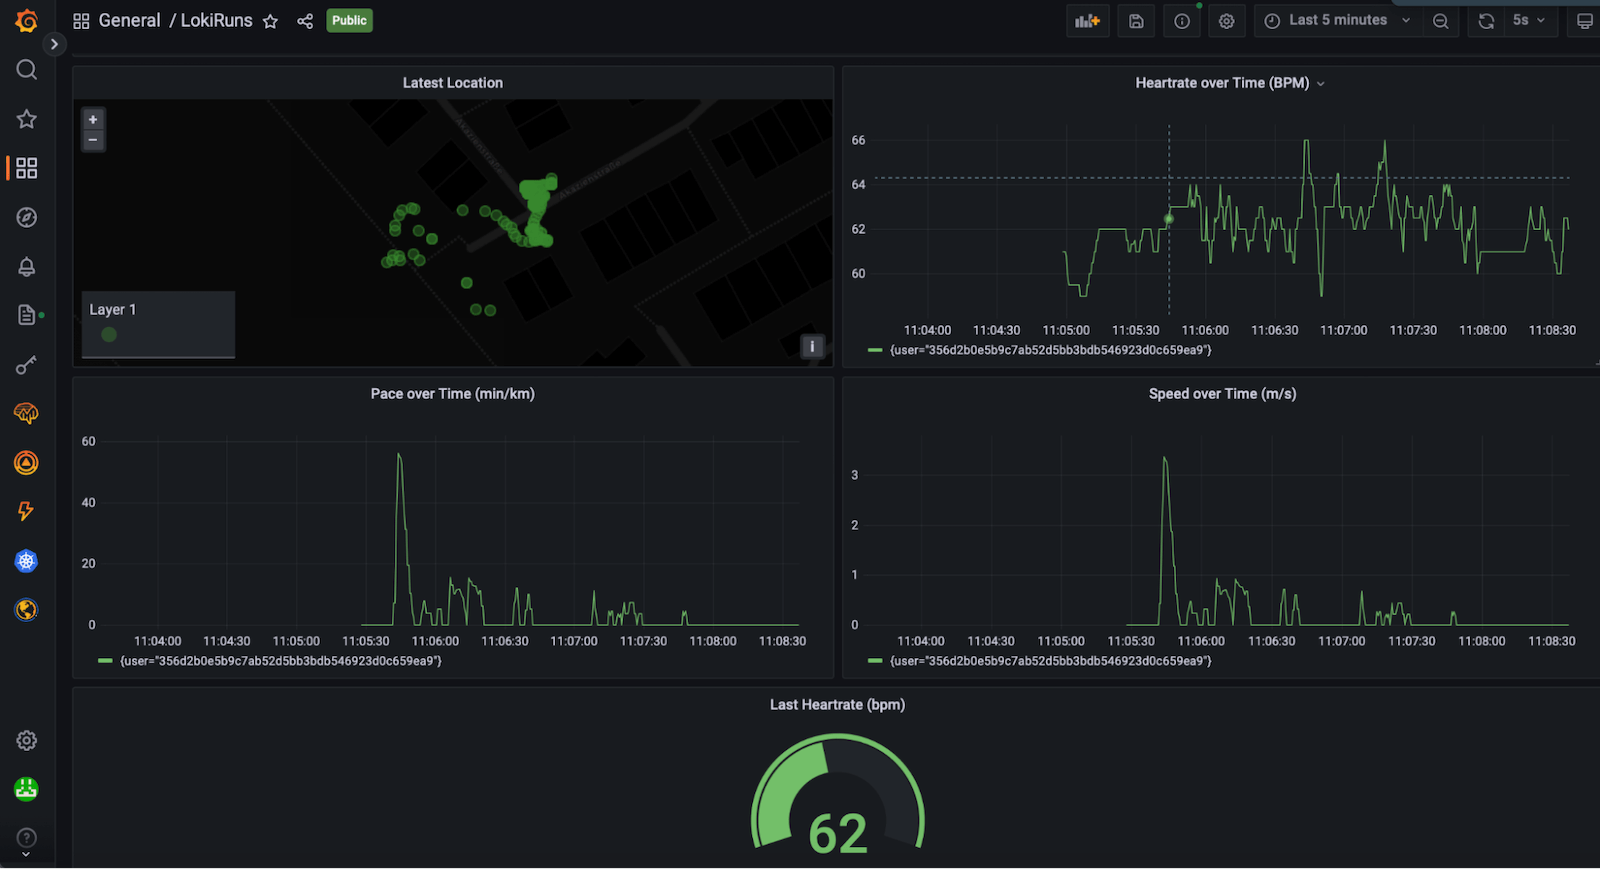 A dashboard with running metrics